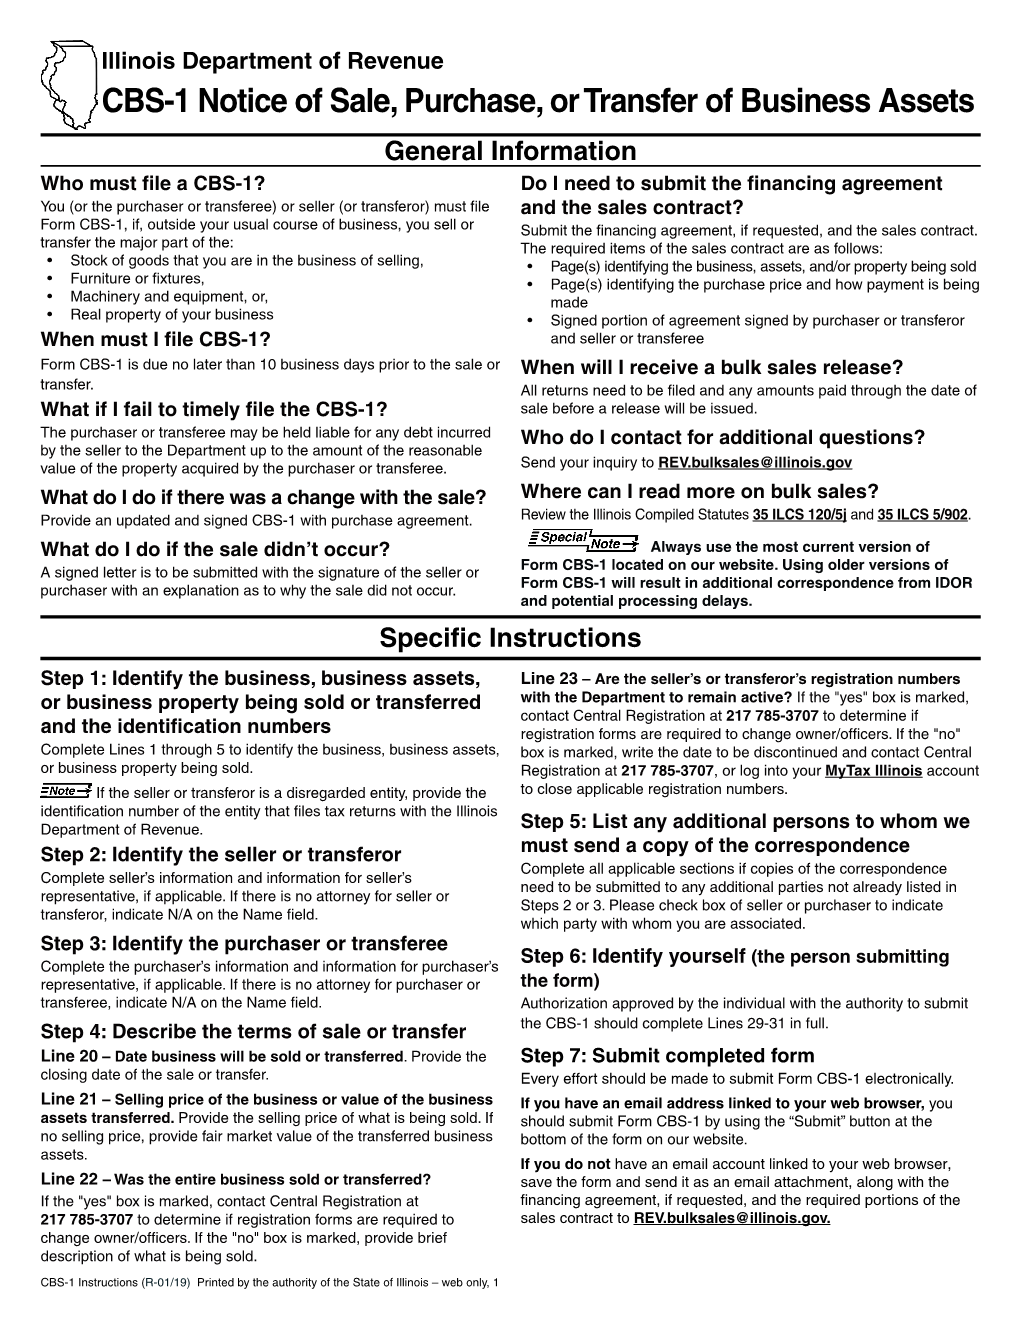 CBS-1 Instructions (R-01/19) Printed by the Authority of the State of Illinois – Web Only, 1